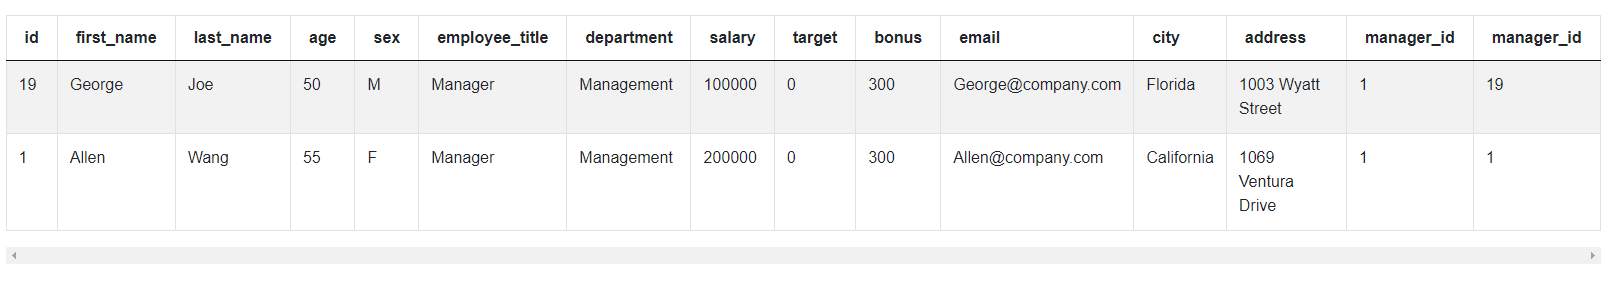 Output 5 for PayPal Data Scientist Interview Questions